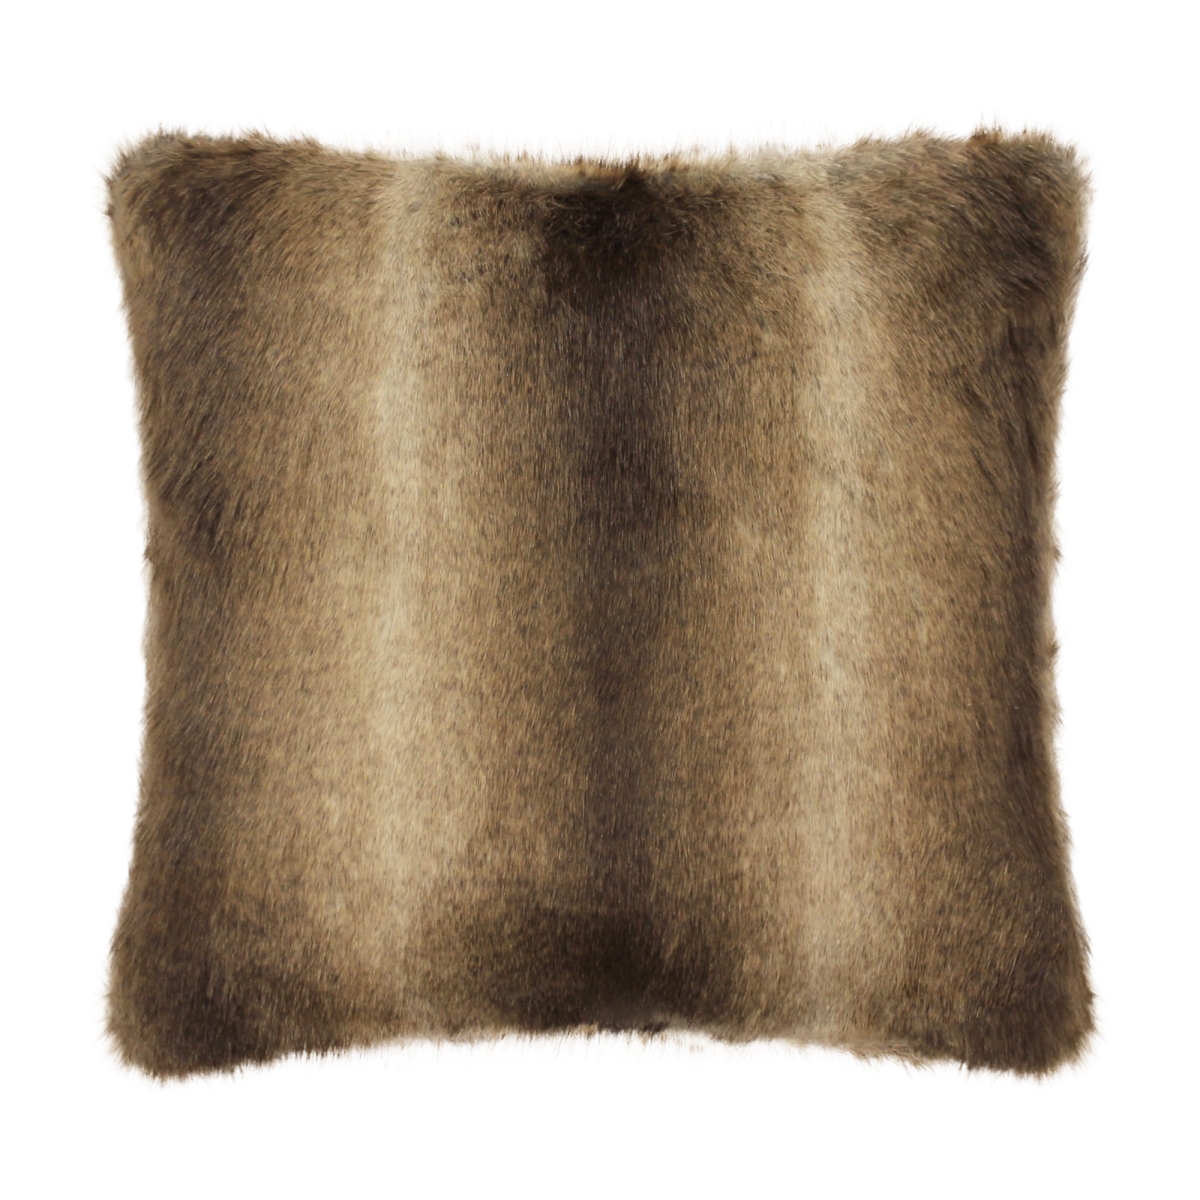 12 X 20 In. Wolf Faux Fur Cushion Cover - Brown